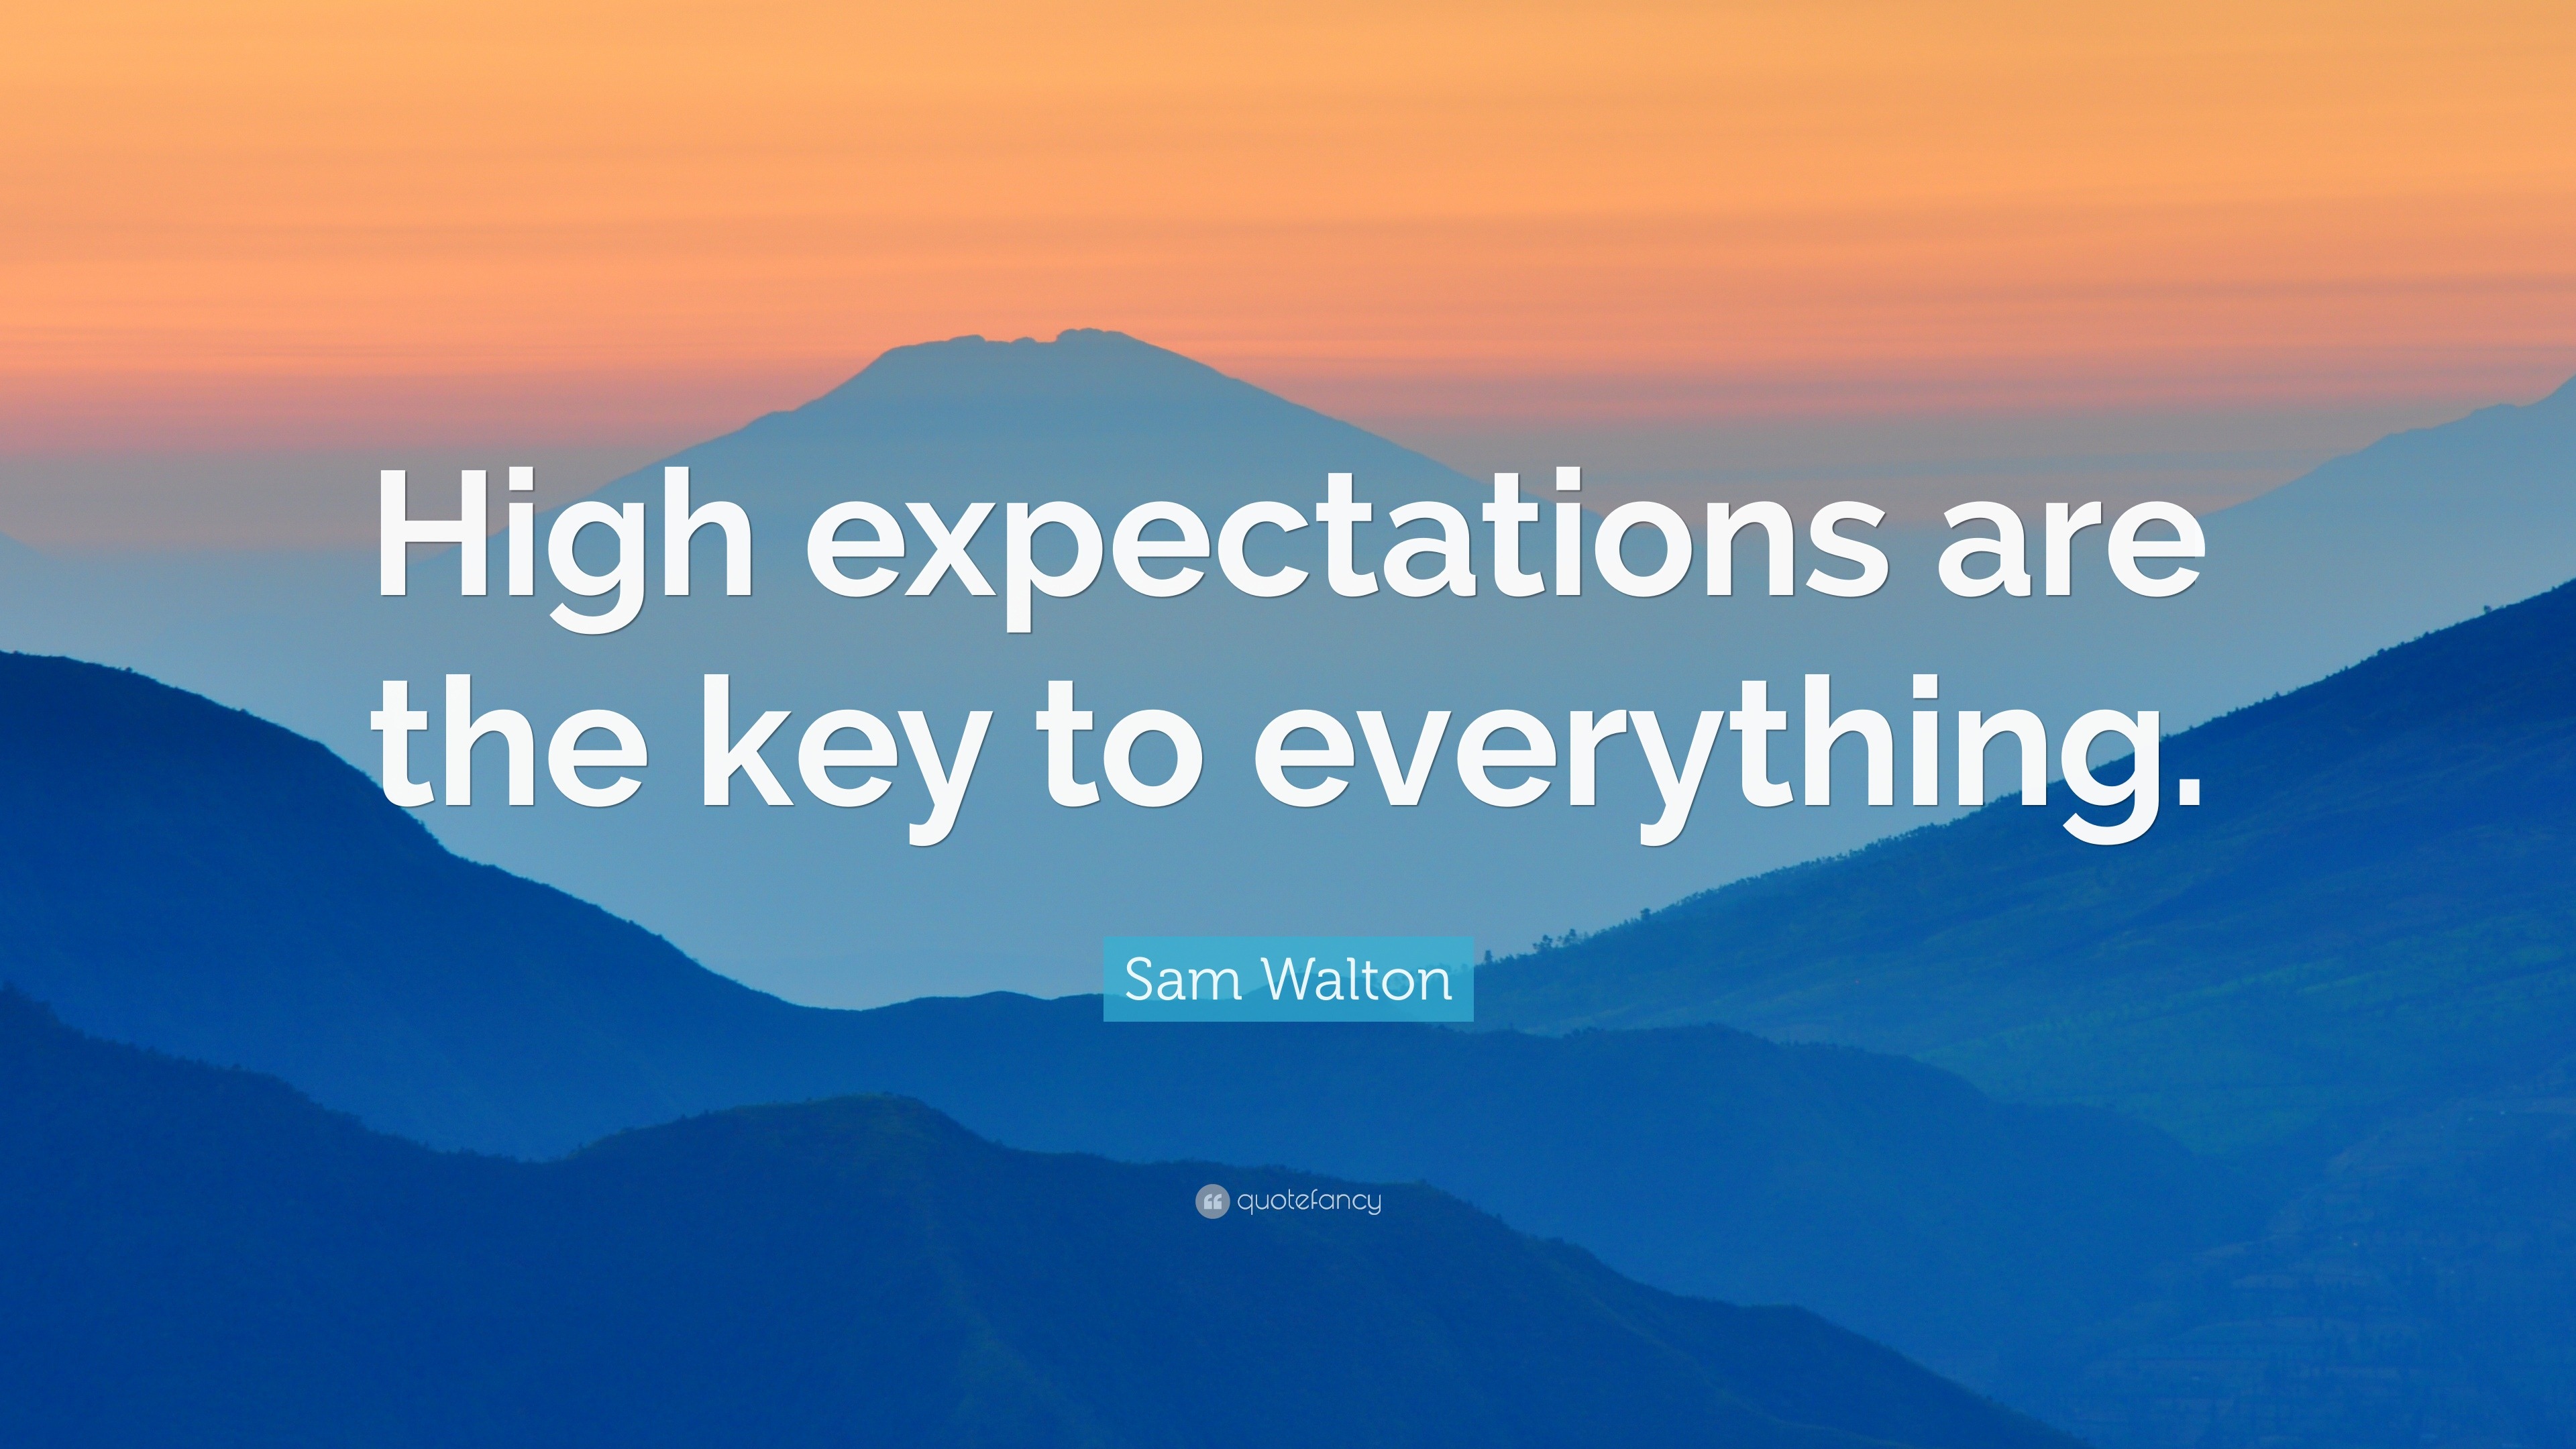 Sam Walton Quote: “High expectations are the key to everything.” (19